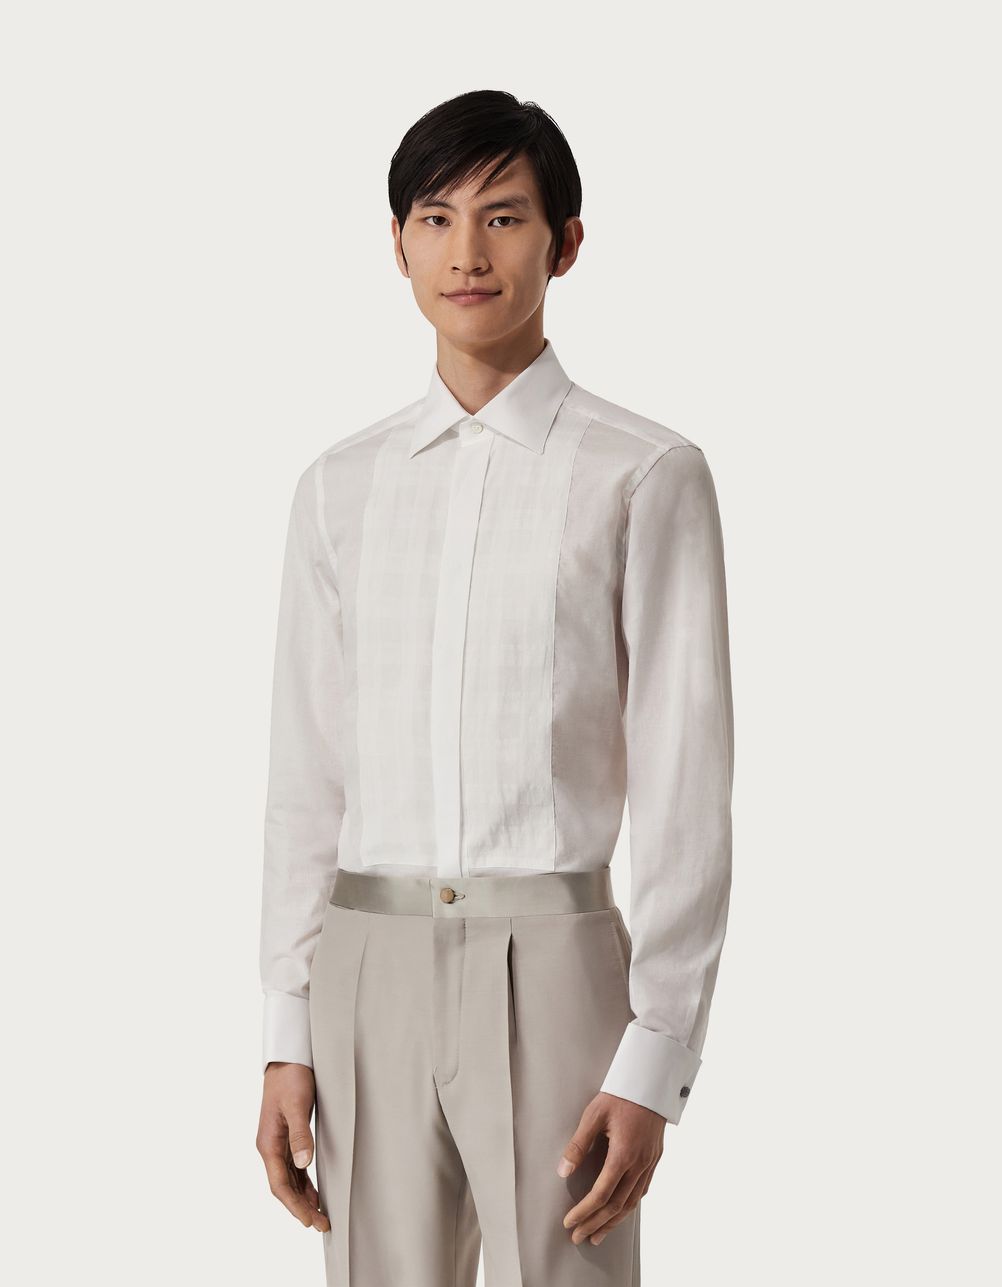 White cotton formal shirt in a slim fit